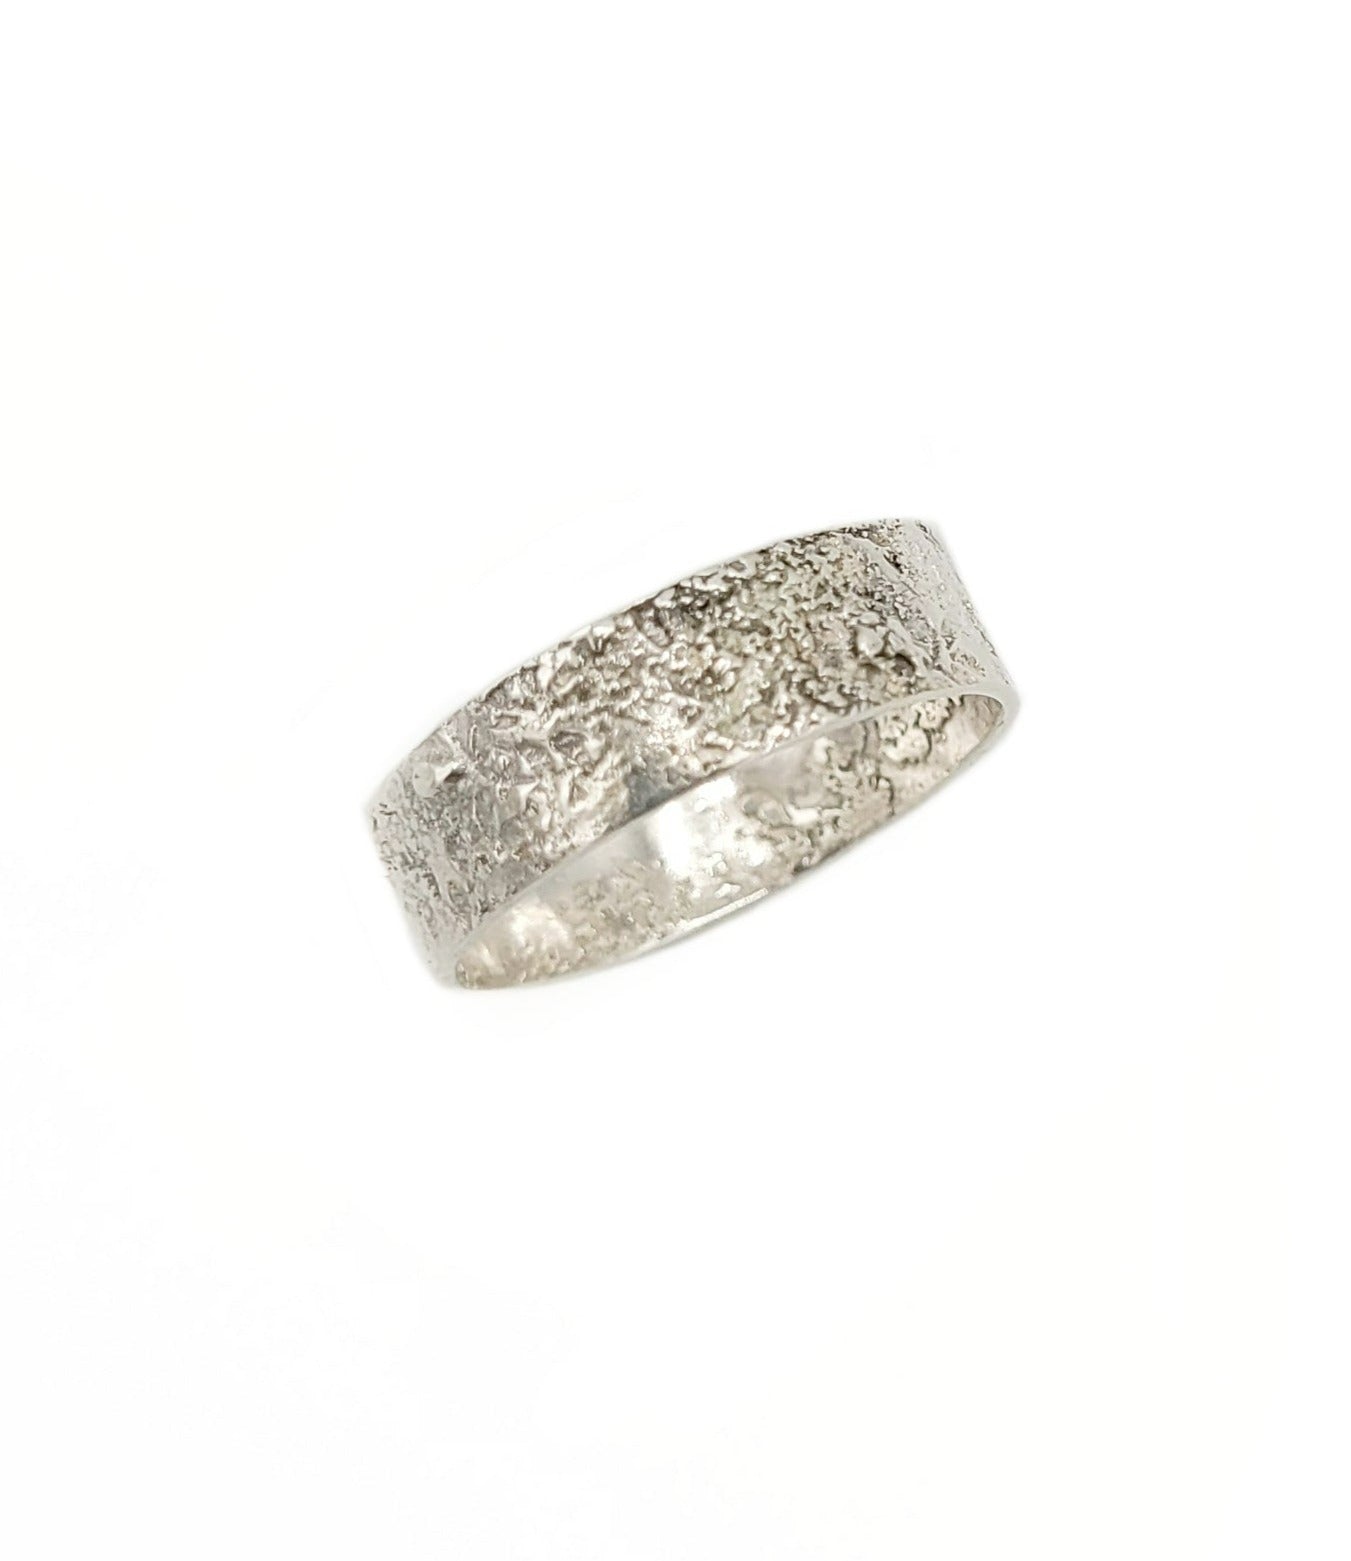 Organic Textured Silver Ring